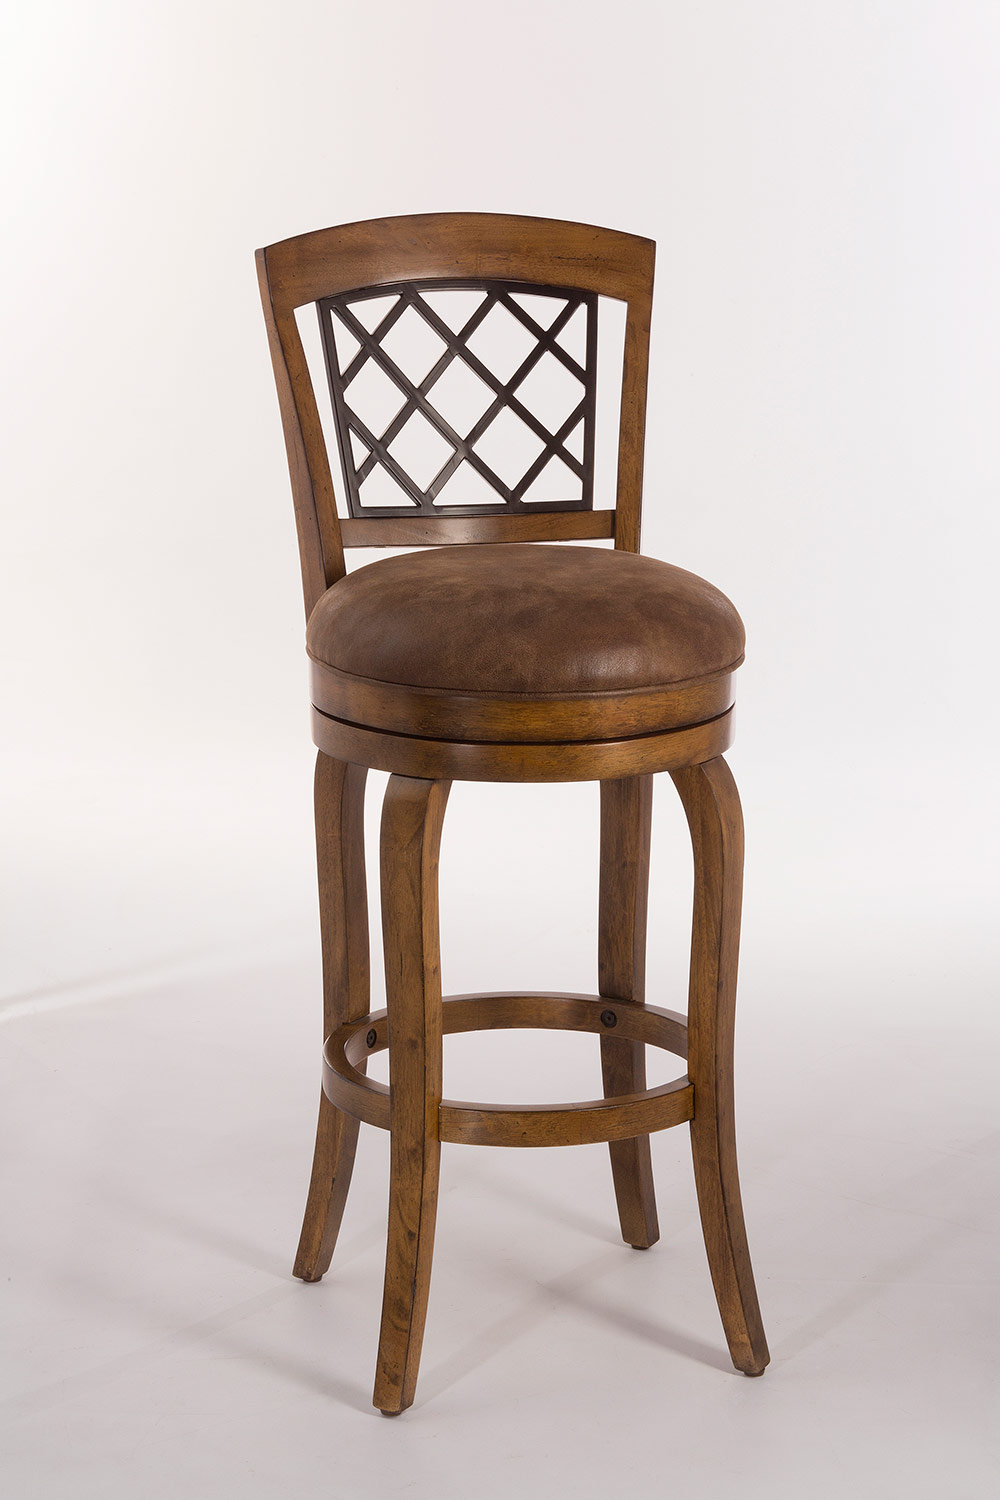 Hillsdale Ericsson Swivel Counter Stool - Distressed Light Pine - Brown Leatherette